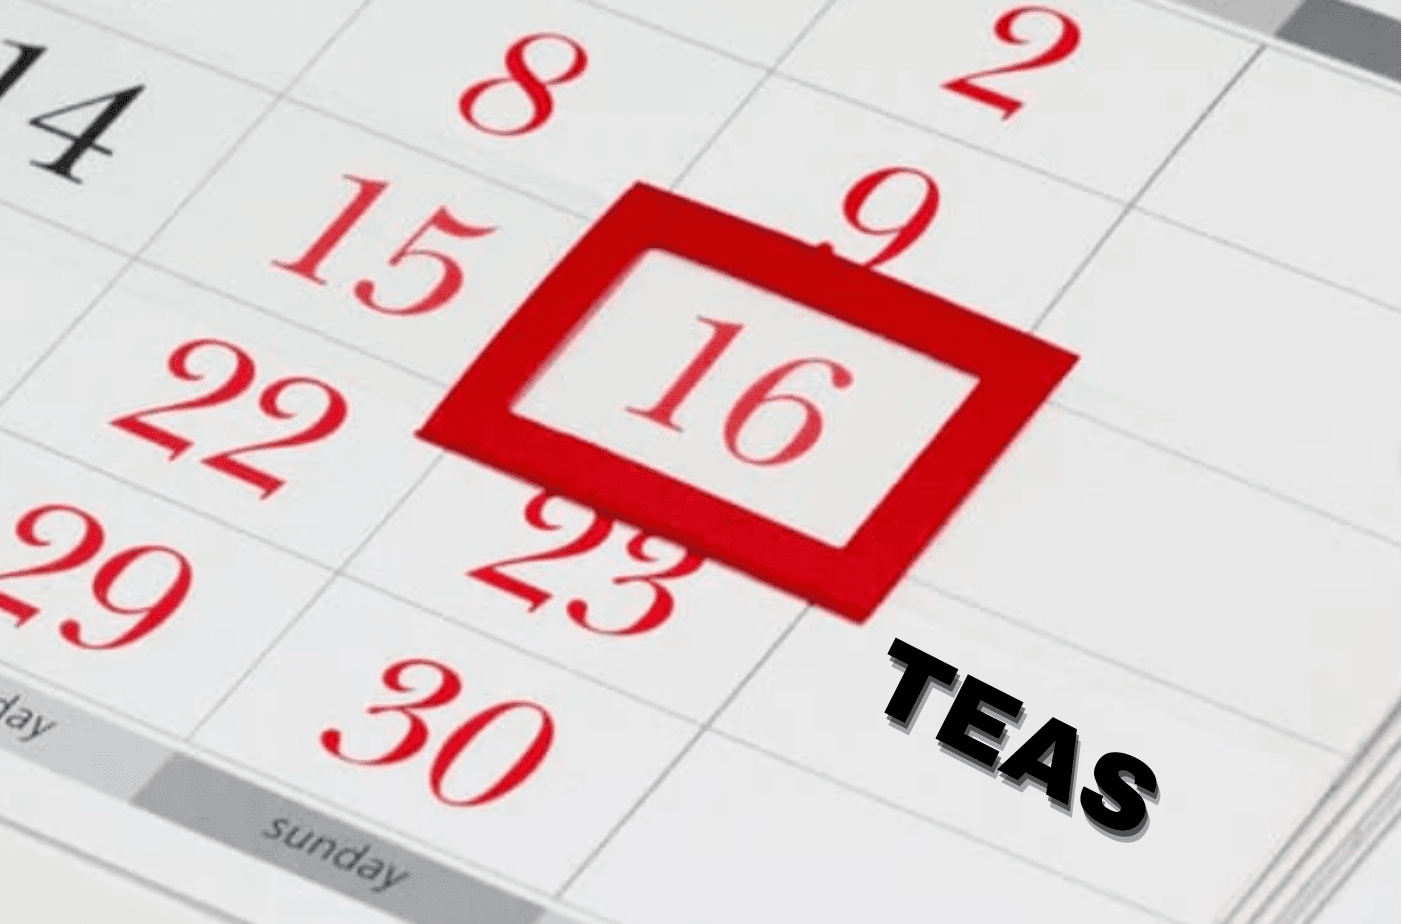 teas-test-dates-and-application-process